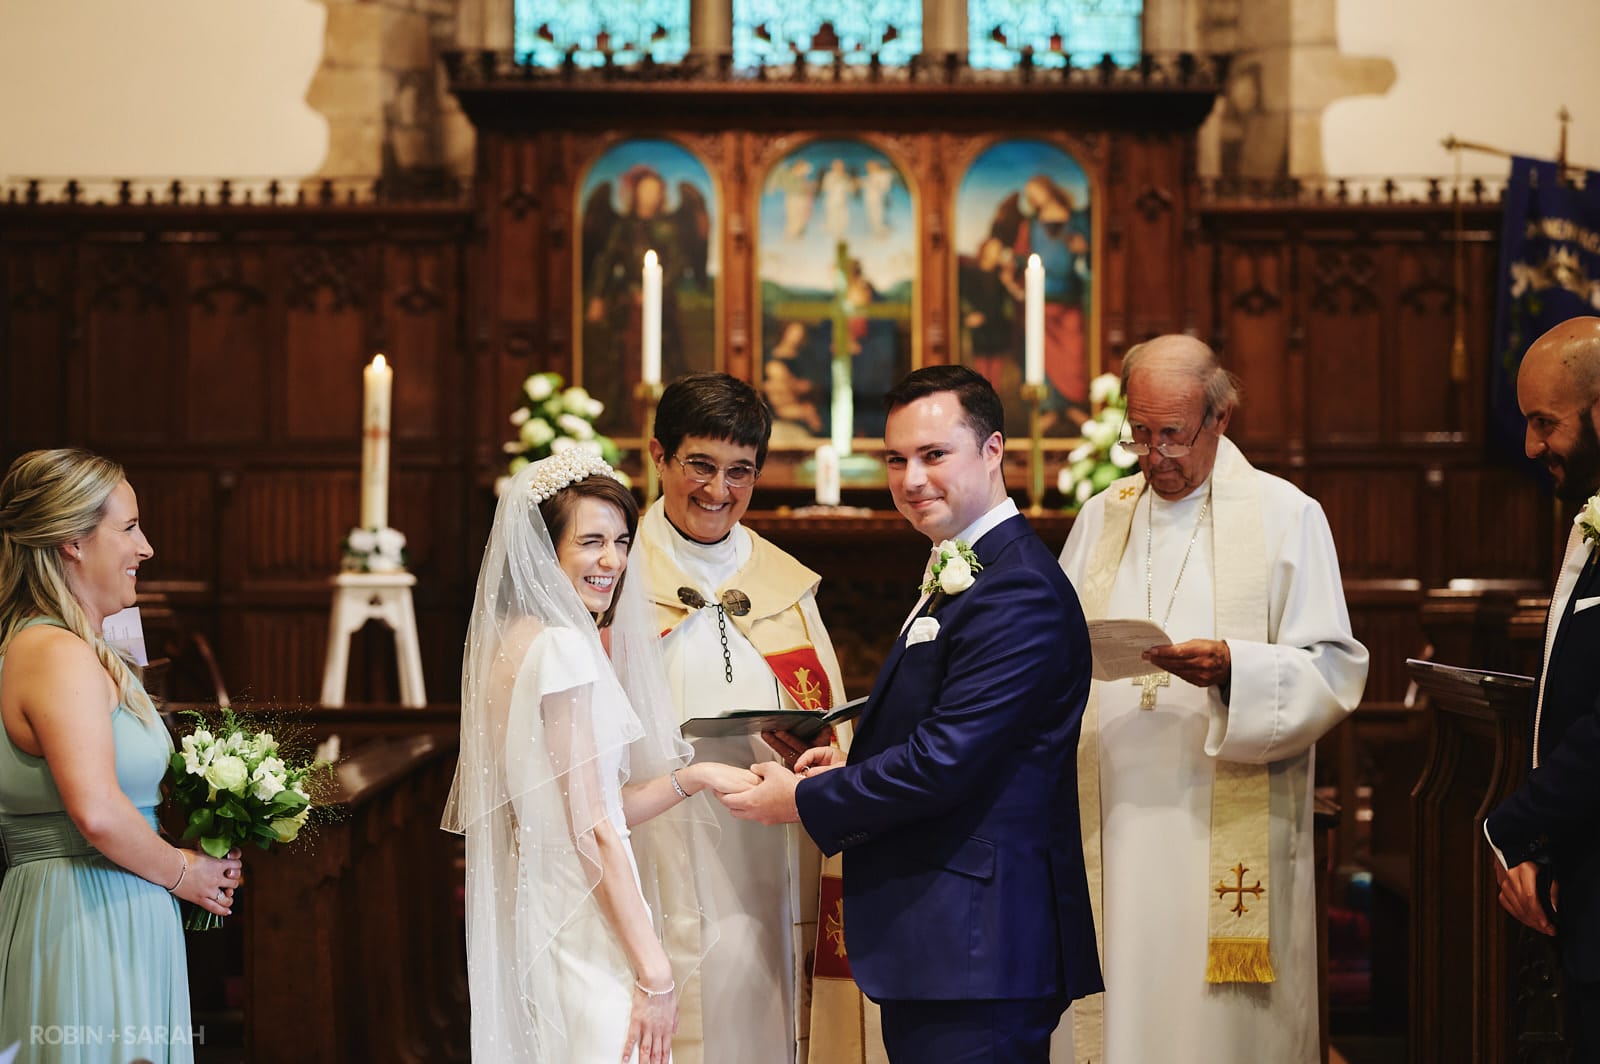 Wedding ceremony at St Peter's church Dunchurch